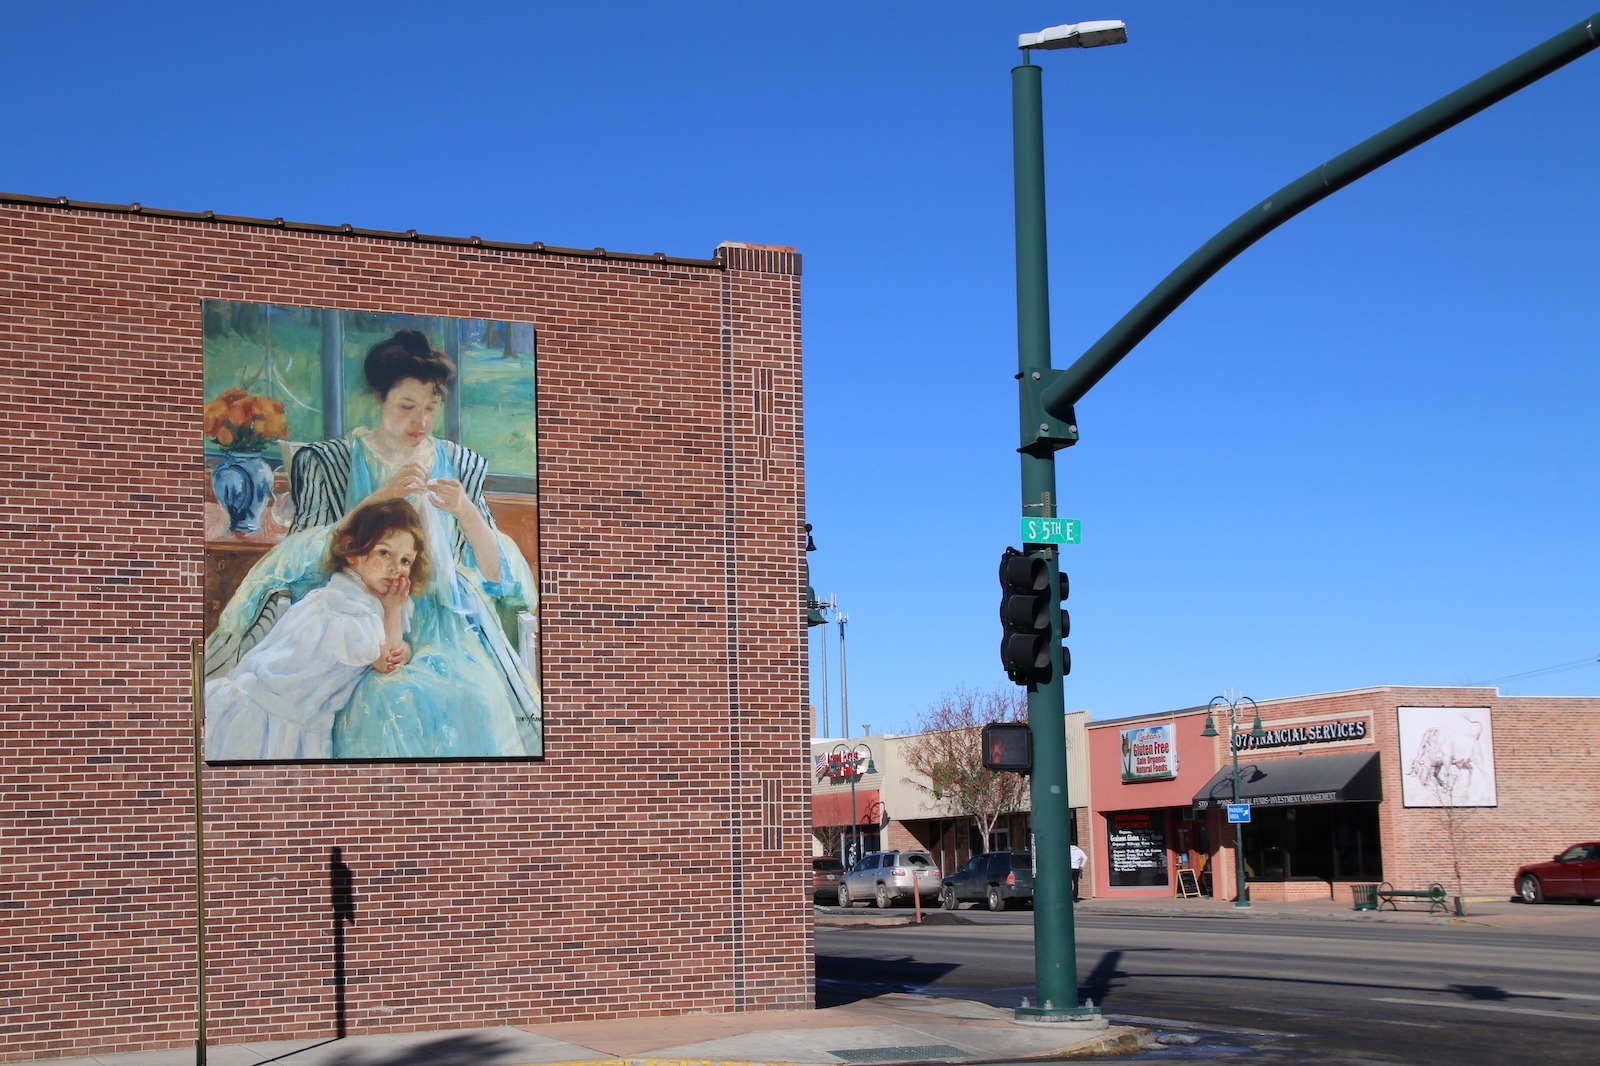 Two pieces of public art on Riverton buildings, Wyoming cultural experiences